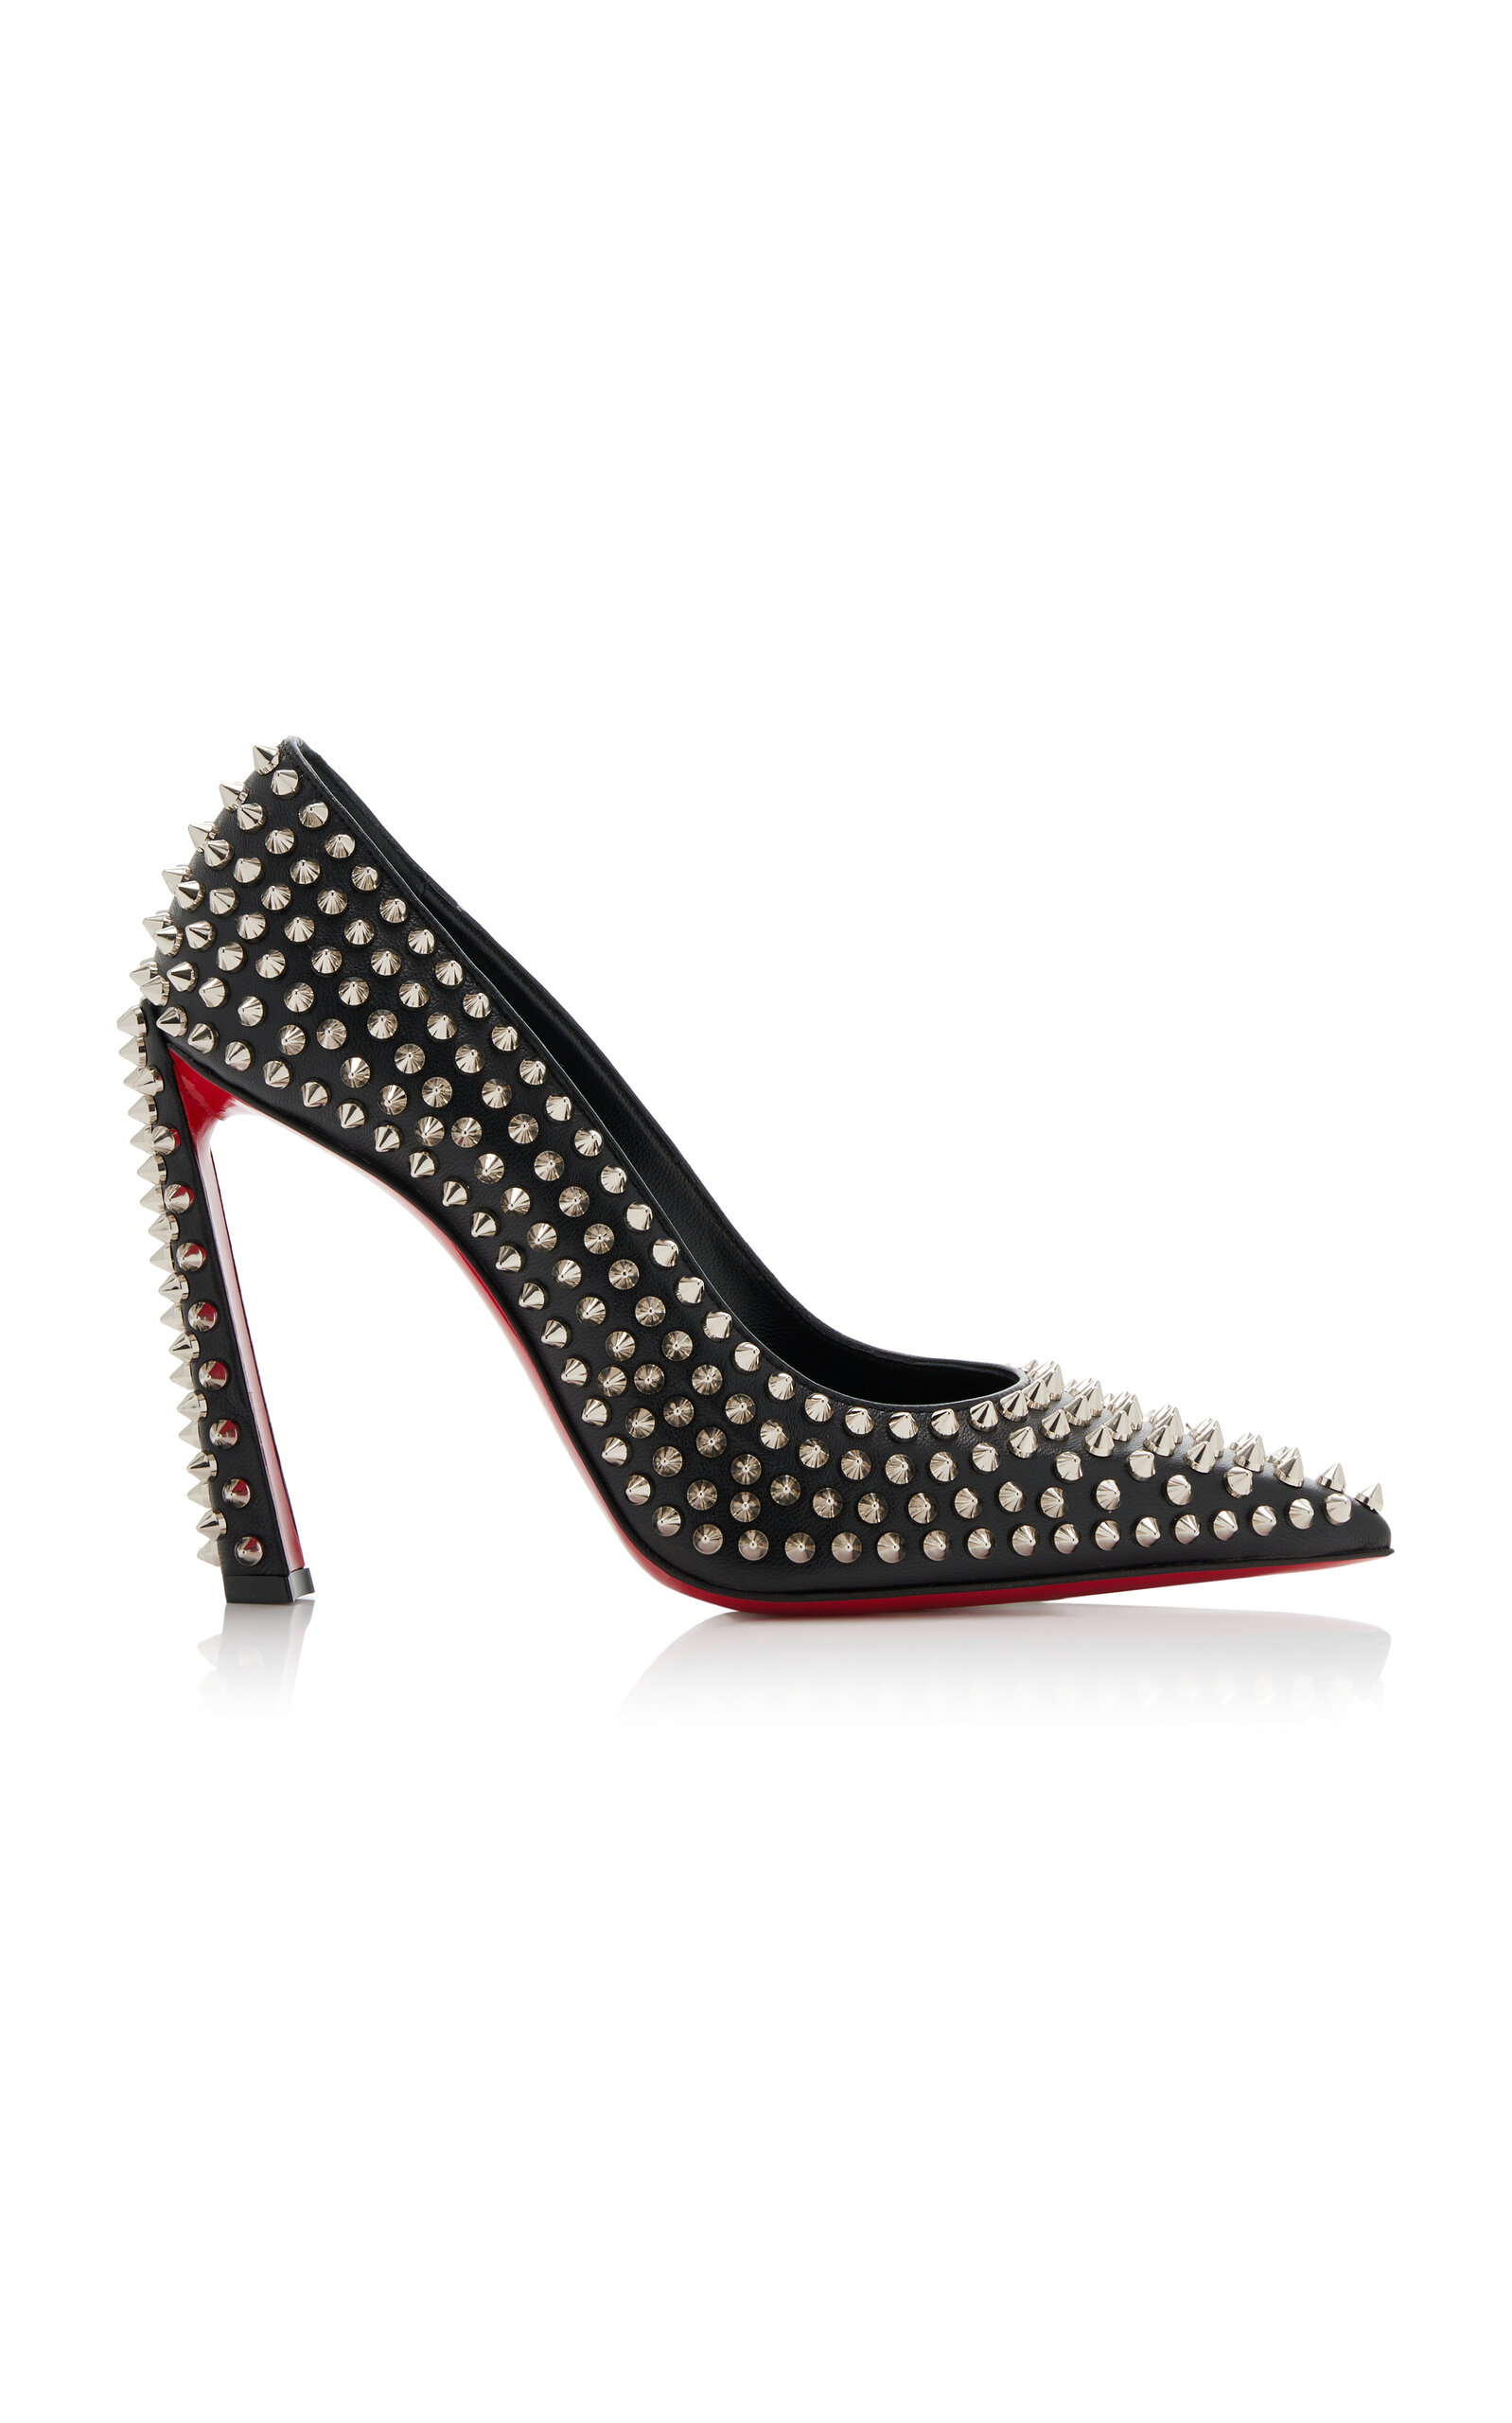 Condora Spikes 100mm Studded Leather Pumps